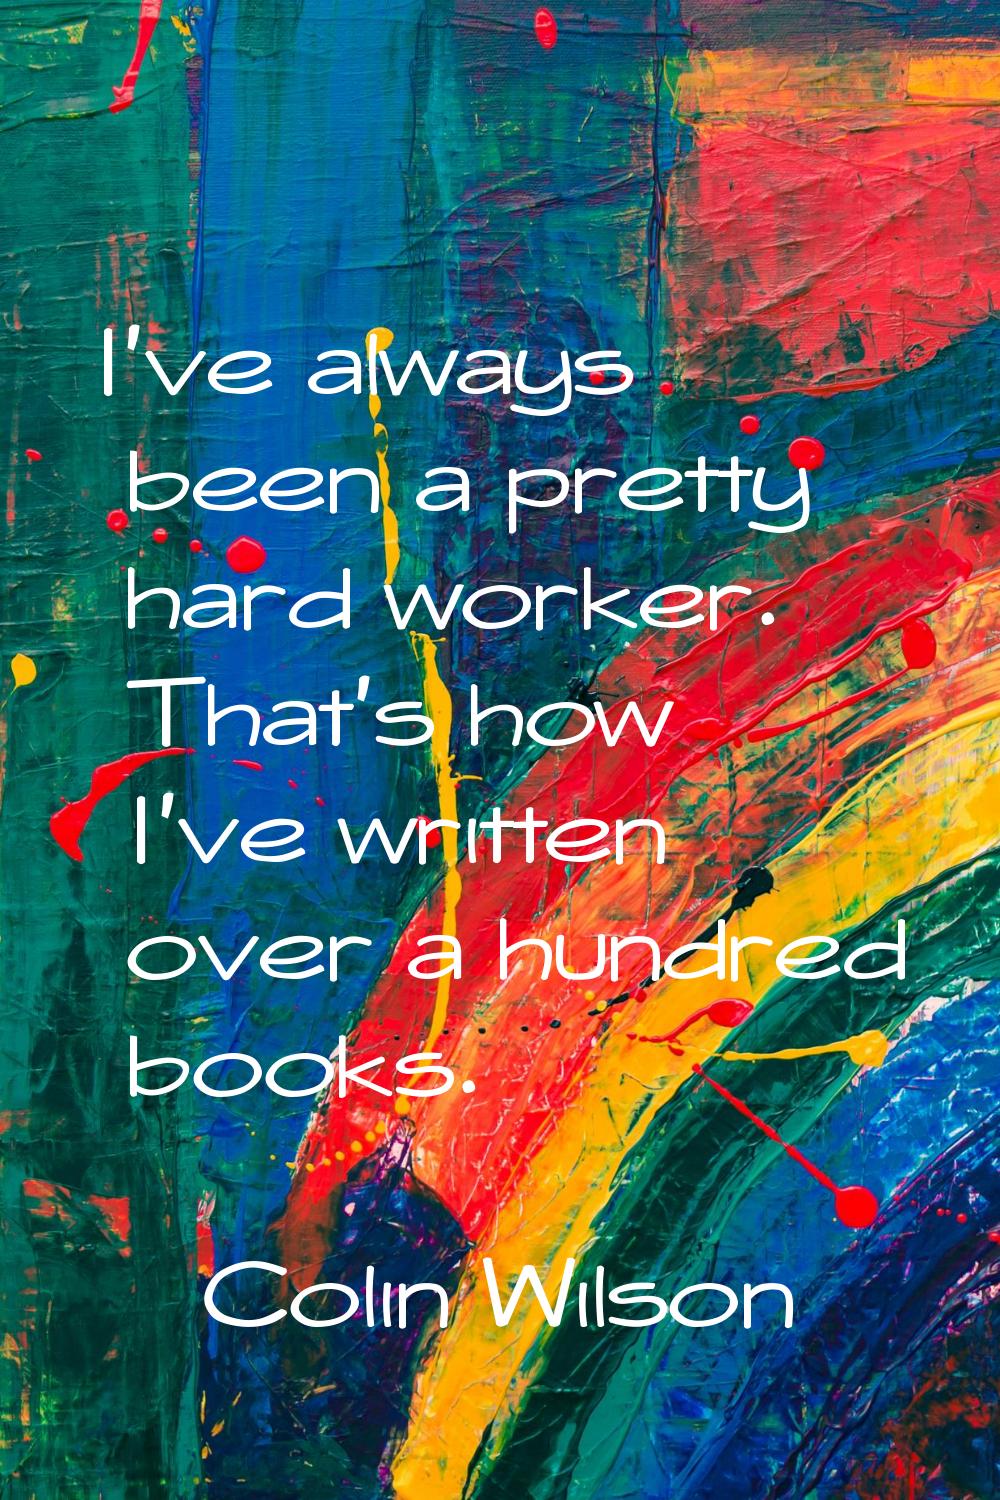 I've always been a pretty hard worker. That's how I've written over a hundred books.